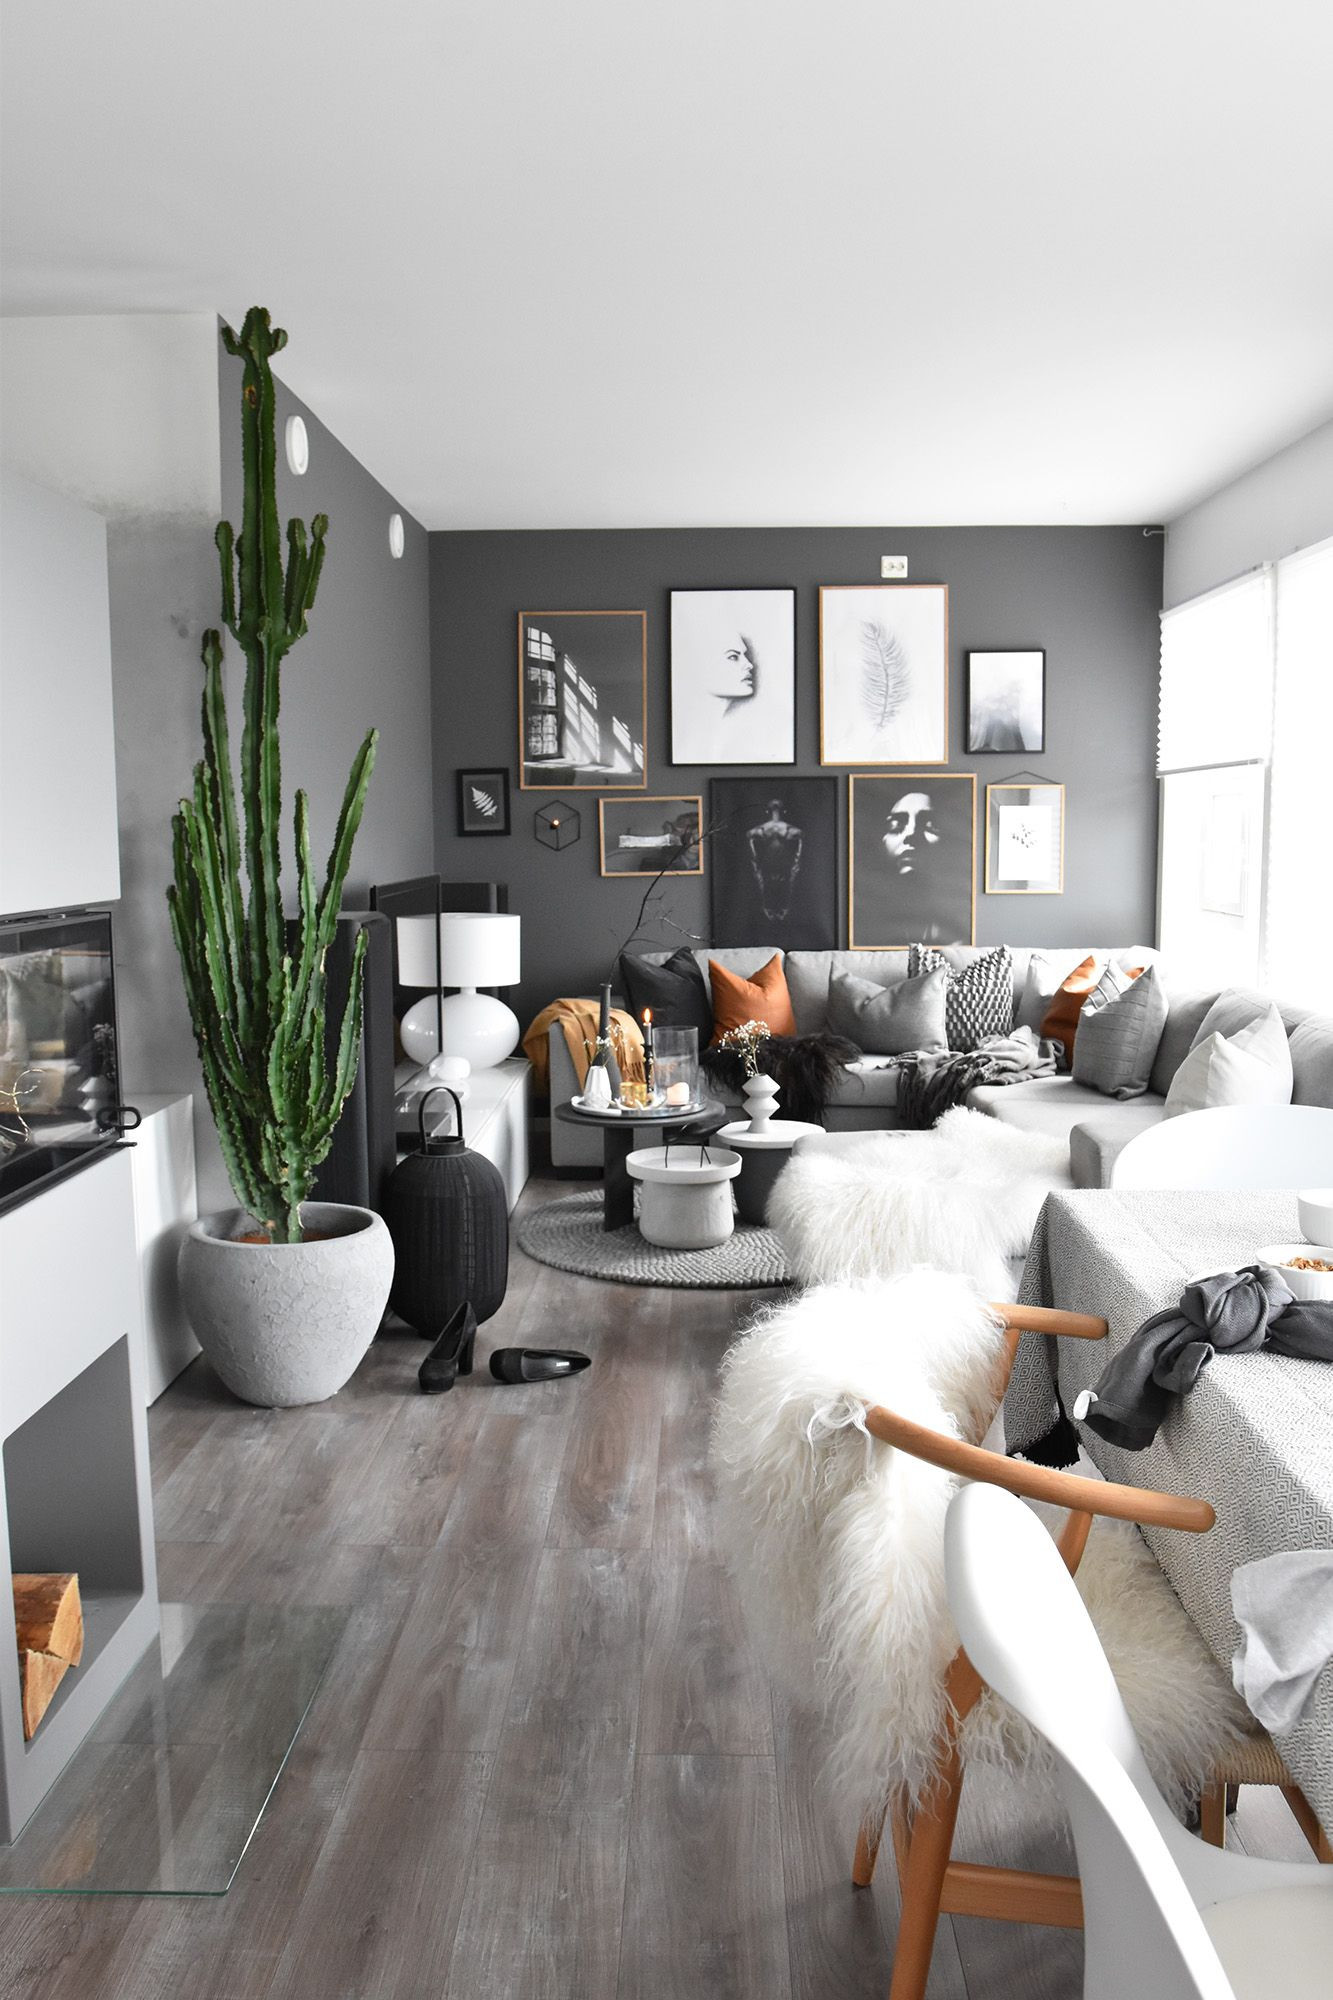 30 Fashionable Trends In Hardwood Flooring Colors 2024 free download trends in hardwood flooring colors of 10 fall trends the seasons latest ideas living rooms pinterest with dark grey black wall living room idea with indoor plants and amazing wall art